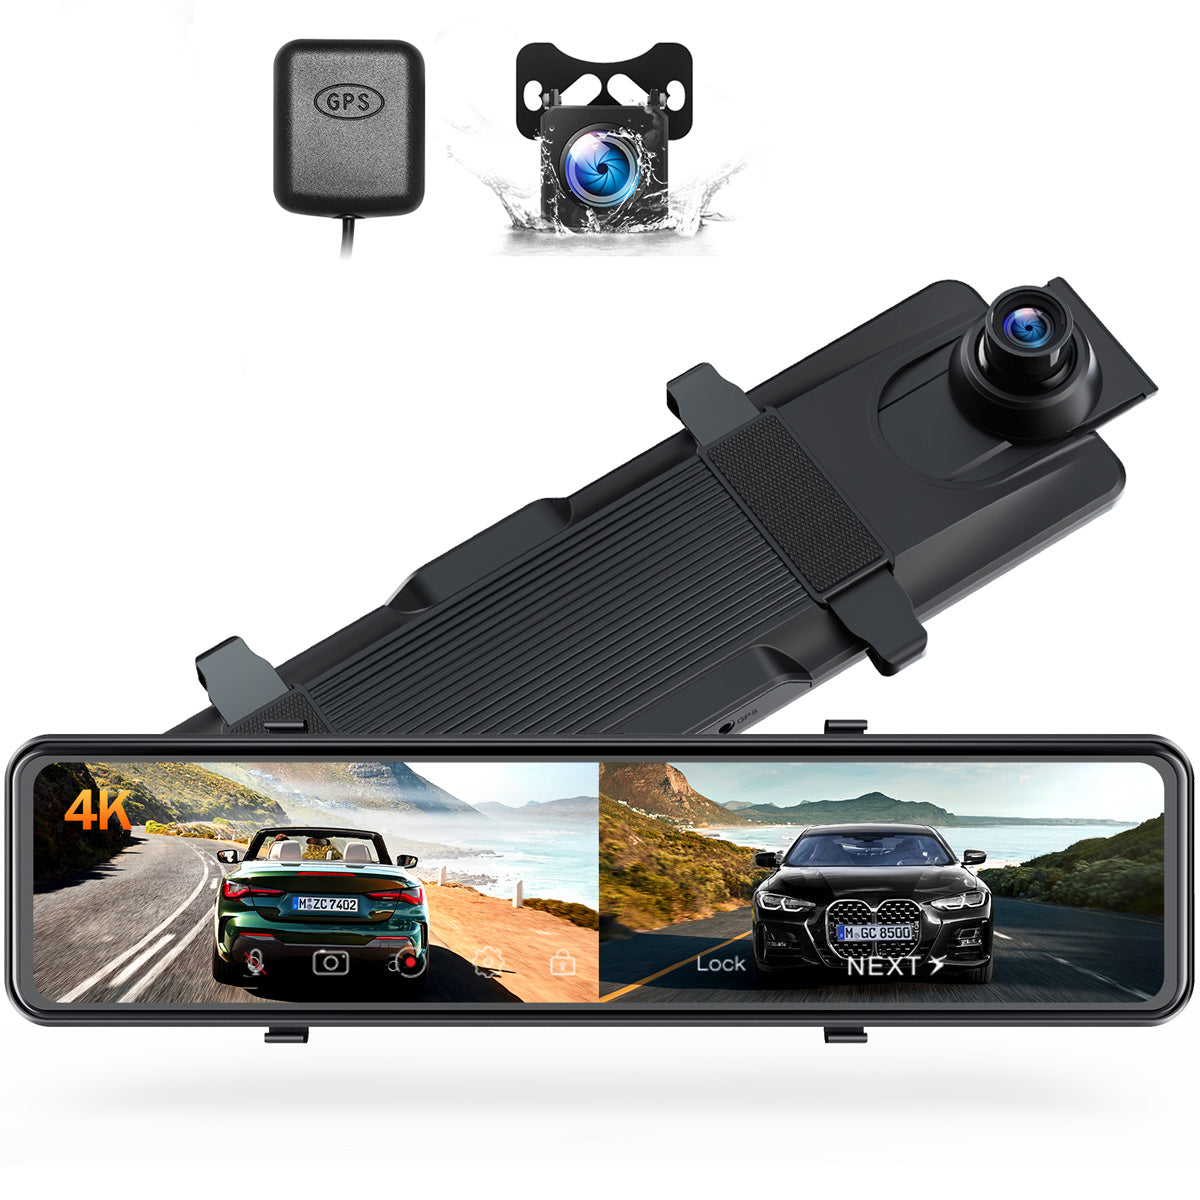 UHD 4K Dash Cam with Built-in WiFi GPS Super Night Vision, TOGUARD Voice  Control Car Camera Front Camera for Car 